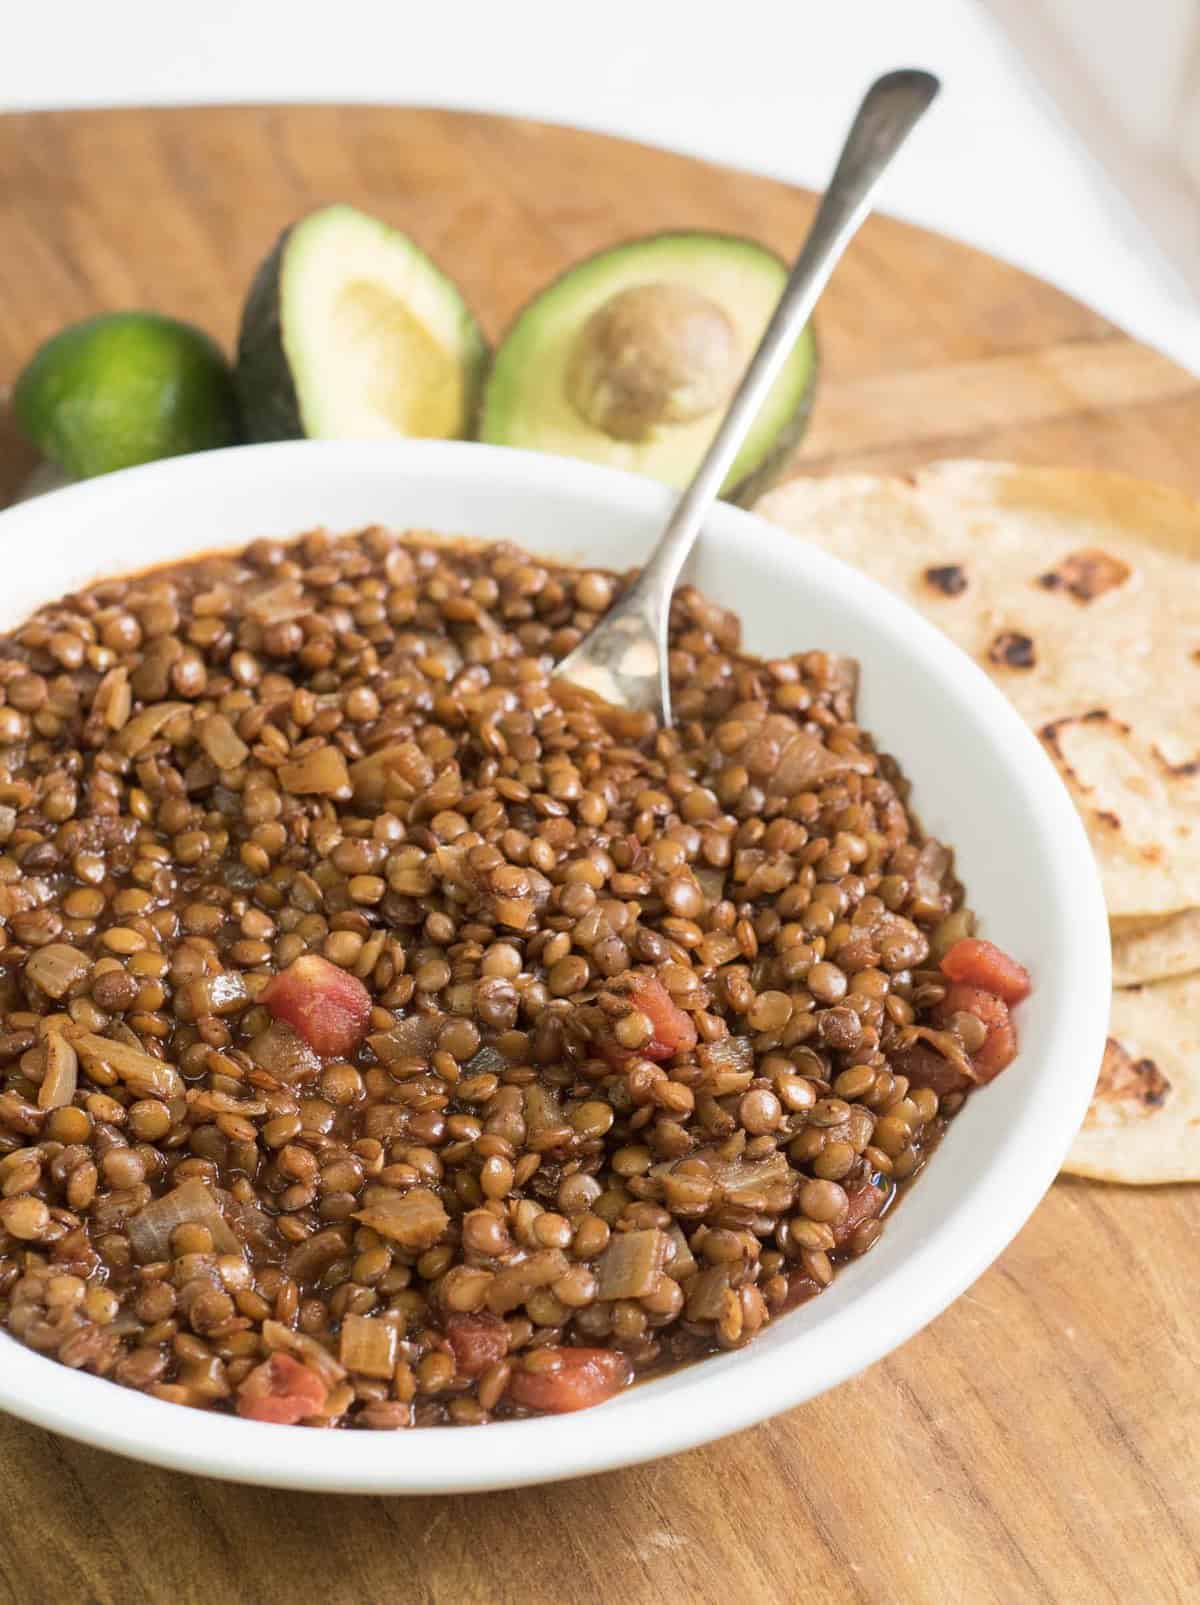 Quick, easy, and healthy lentil tacos are one of our favorite plant-based dinner ideas the whole family loves.